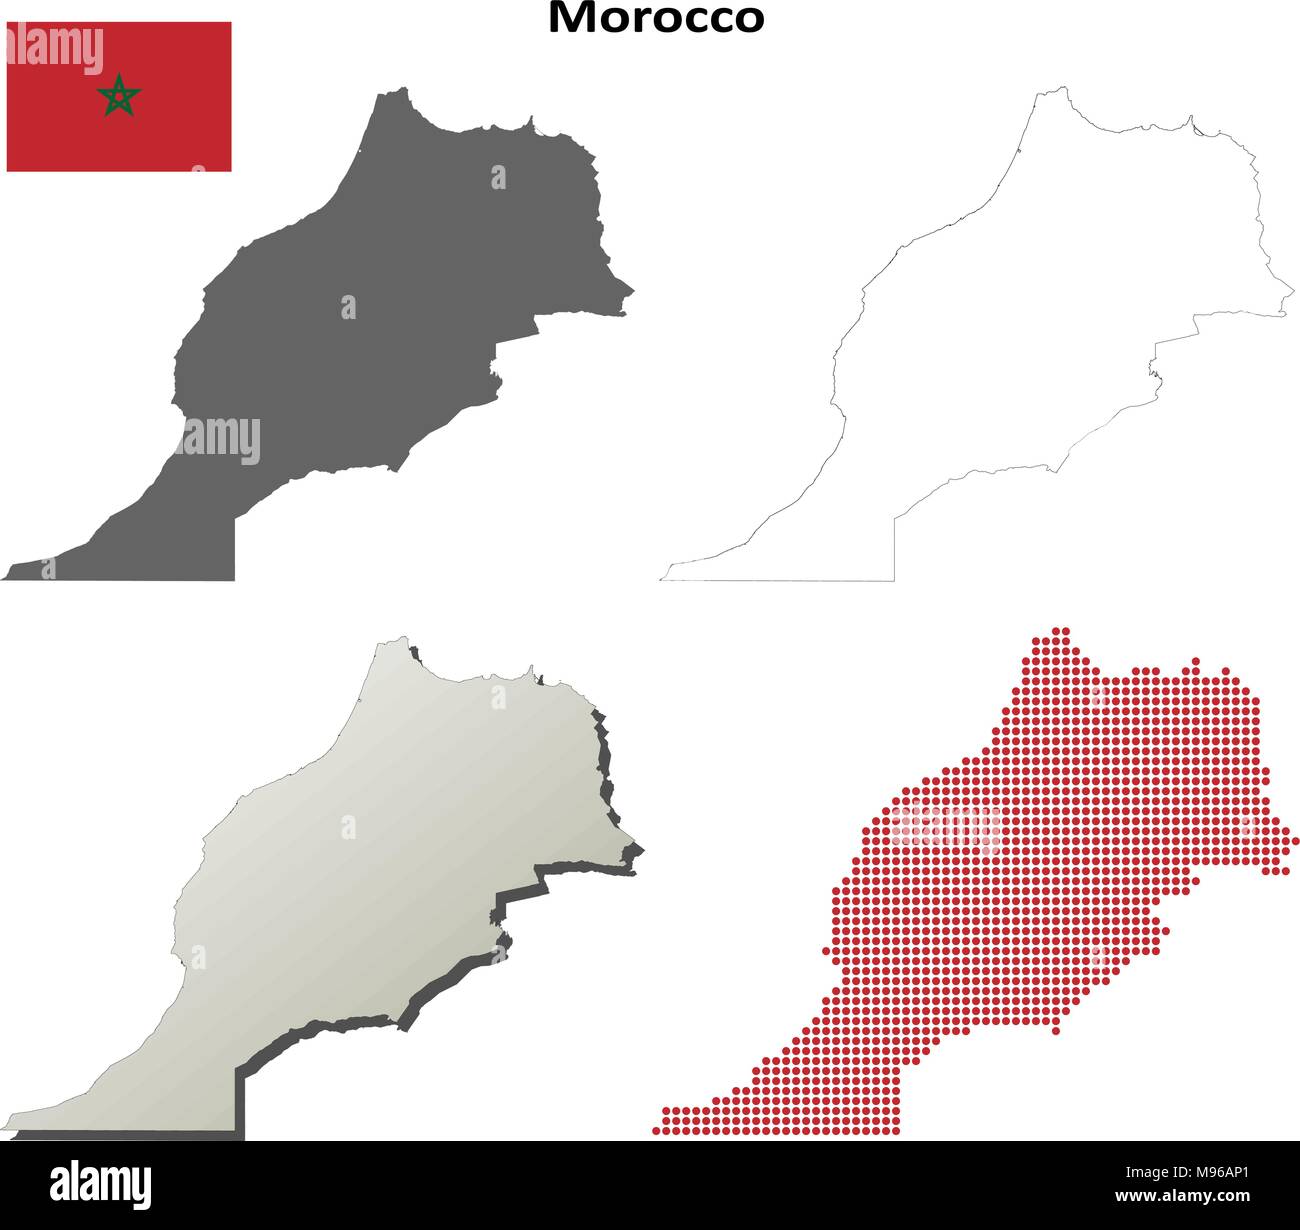 Morocco outline map set Stock Vector